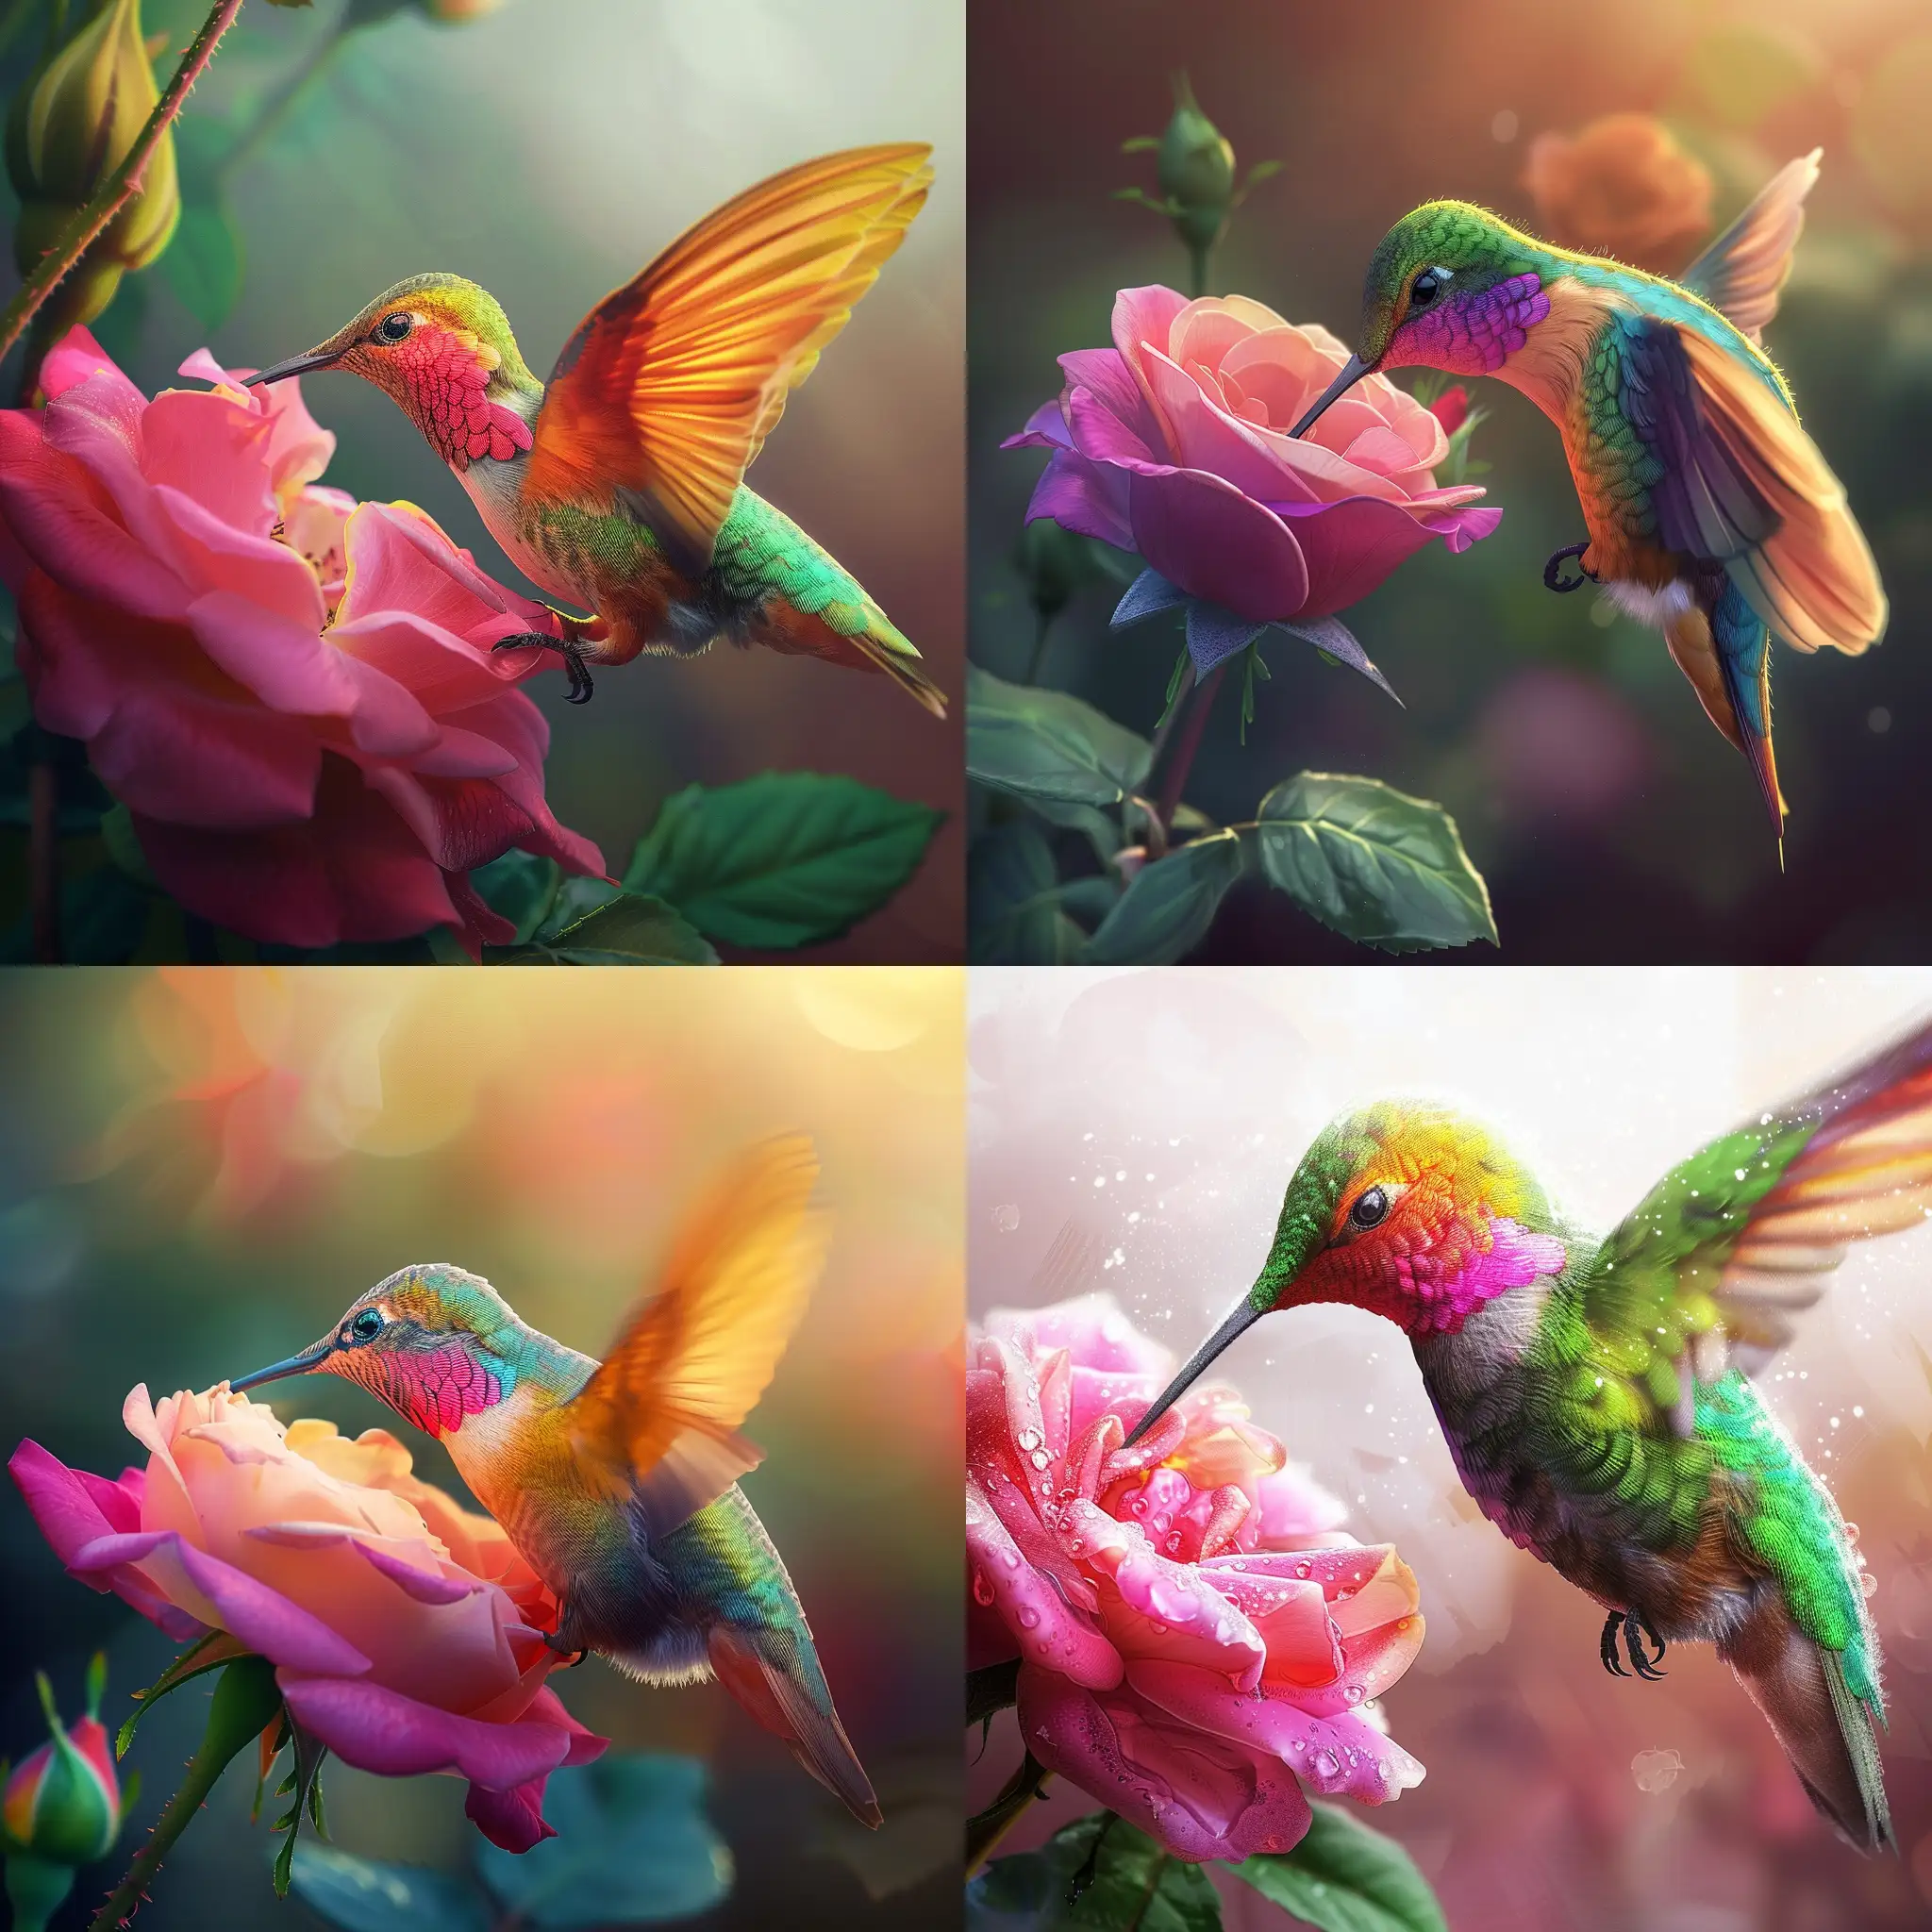 Vibrant-Hummingbird-Feeding-from-Pink-Rose-in-PixarStyle-Animation